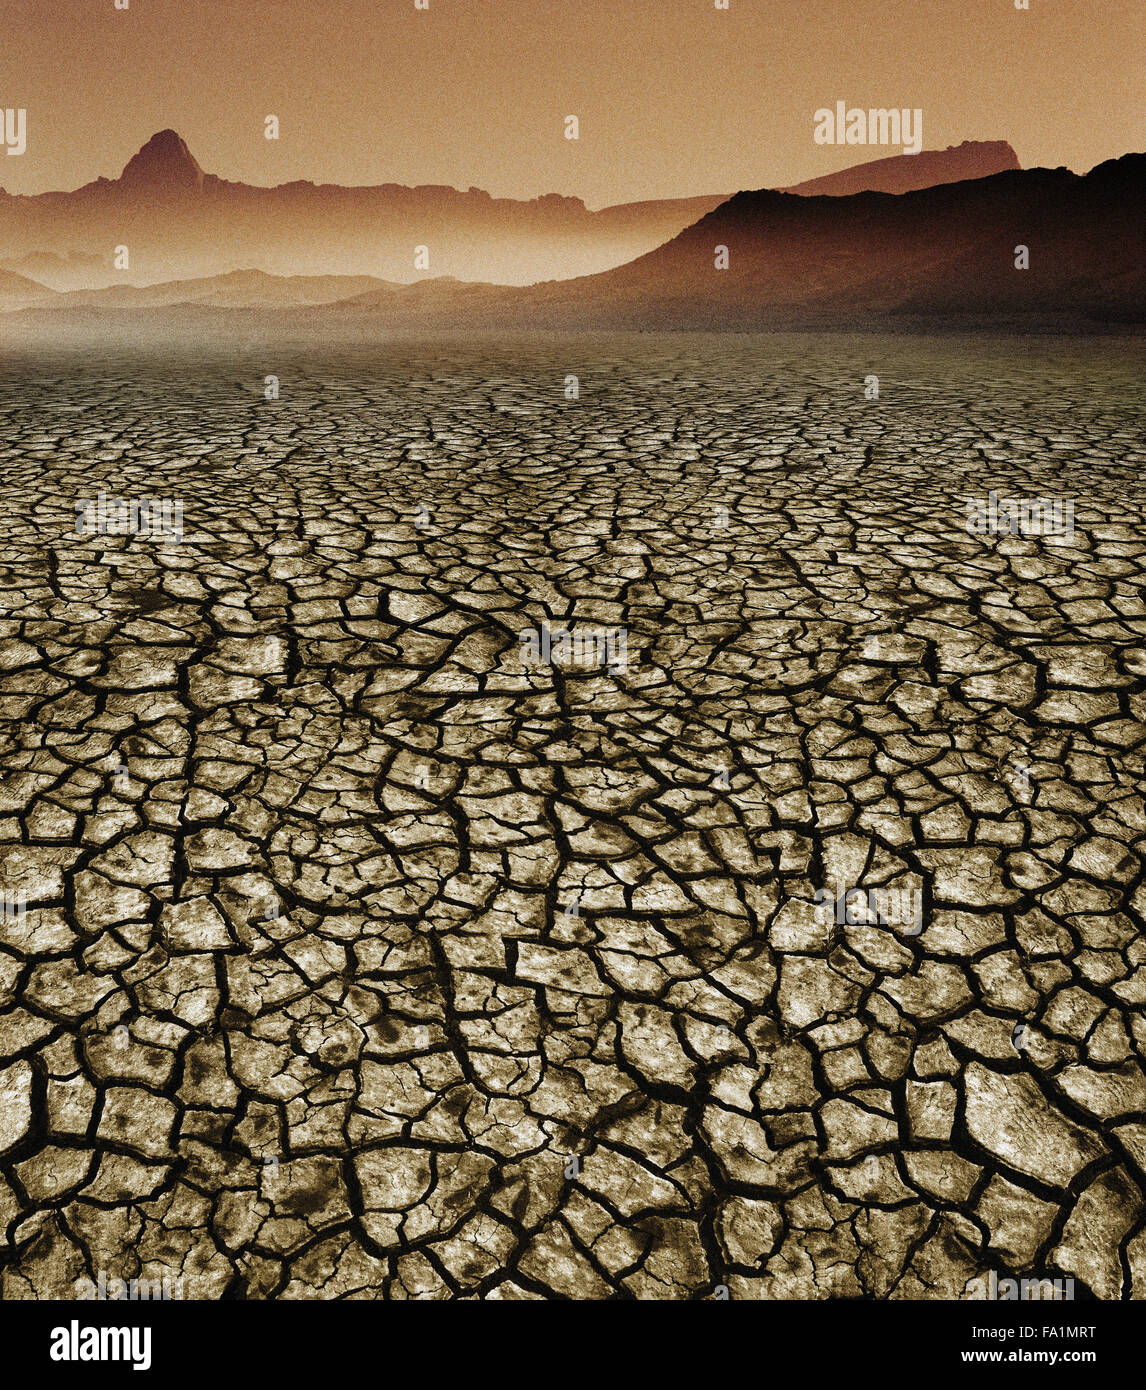 Desert and destroyed land with dried mud through global warming and climate change Stock Photo